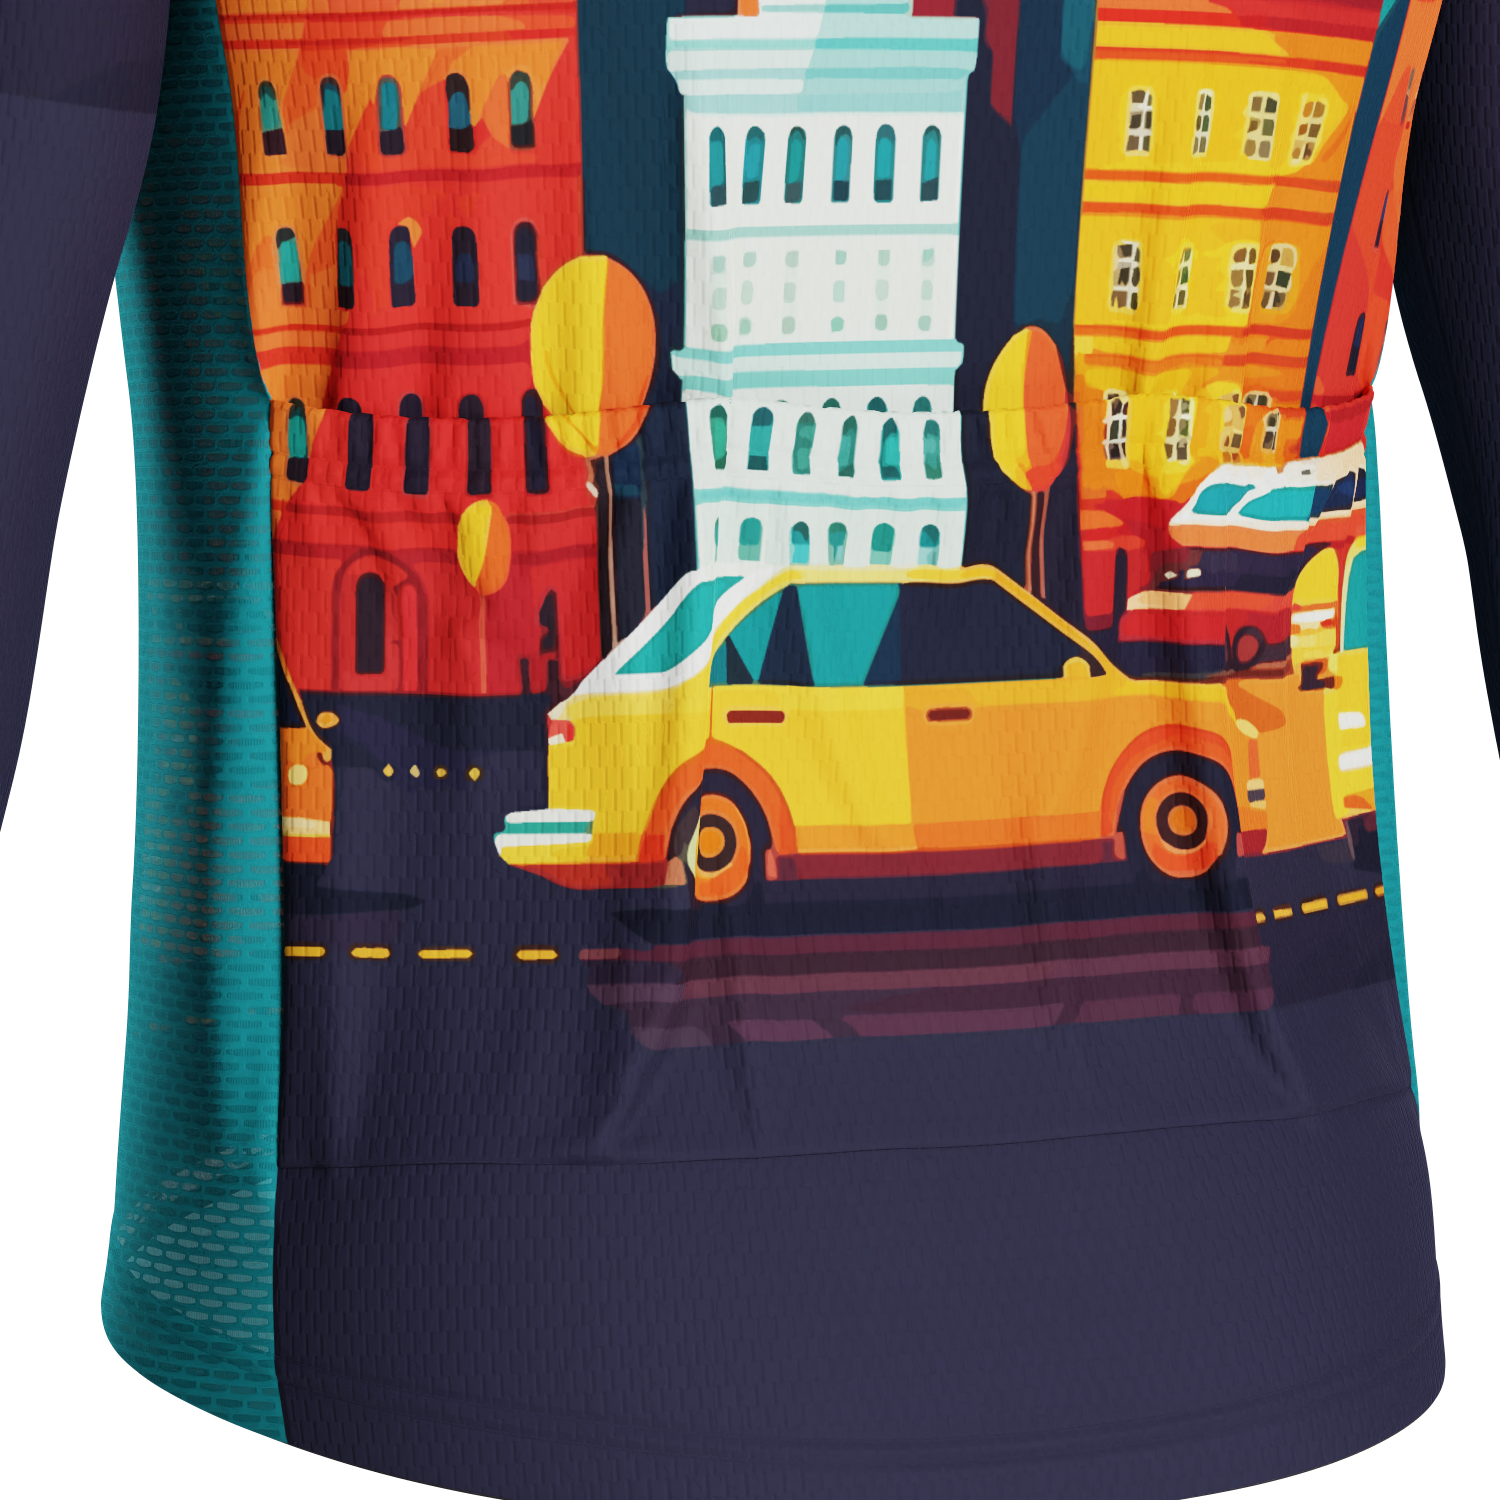 Men's Around The World - New York Long Sleeve Cycling Jersey